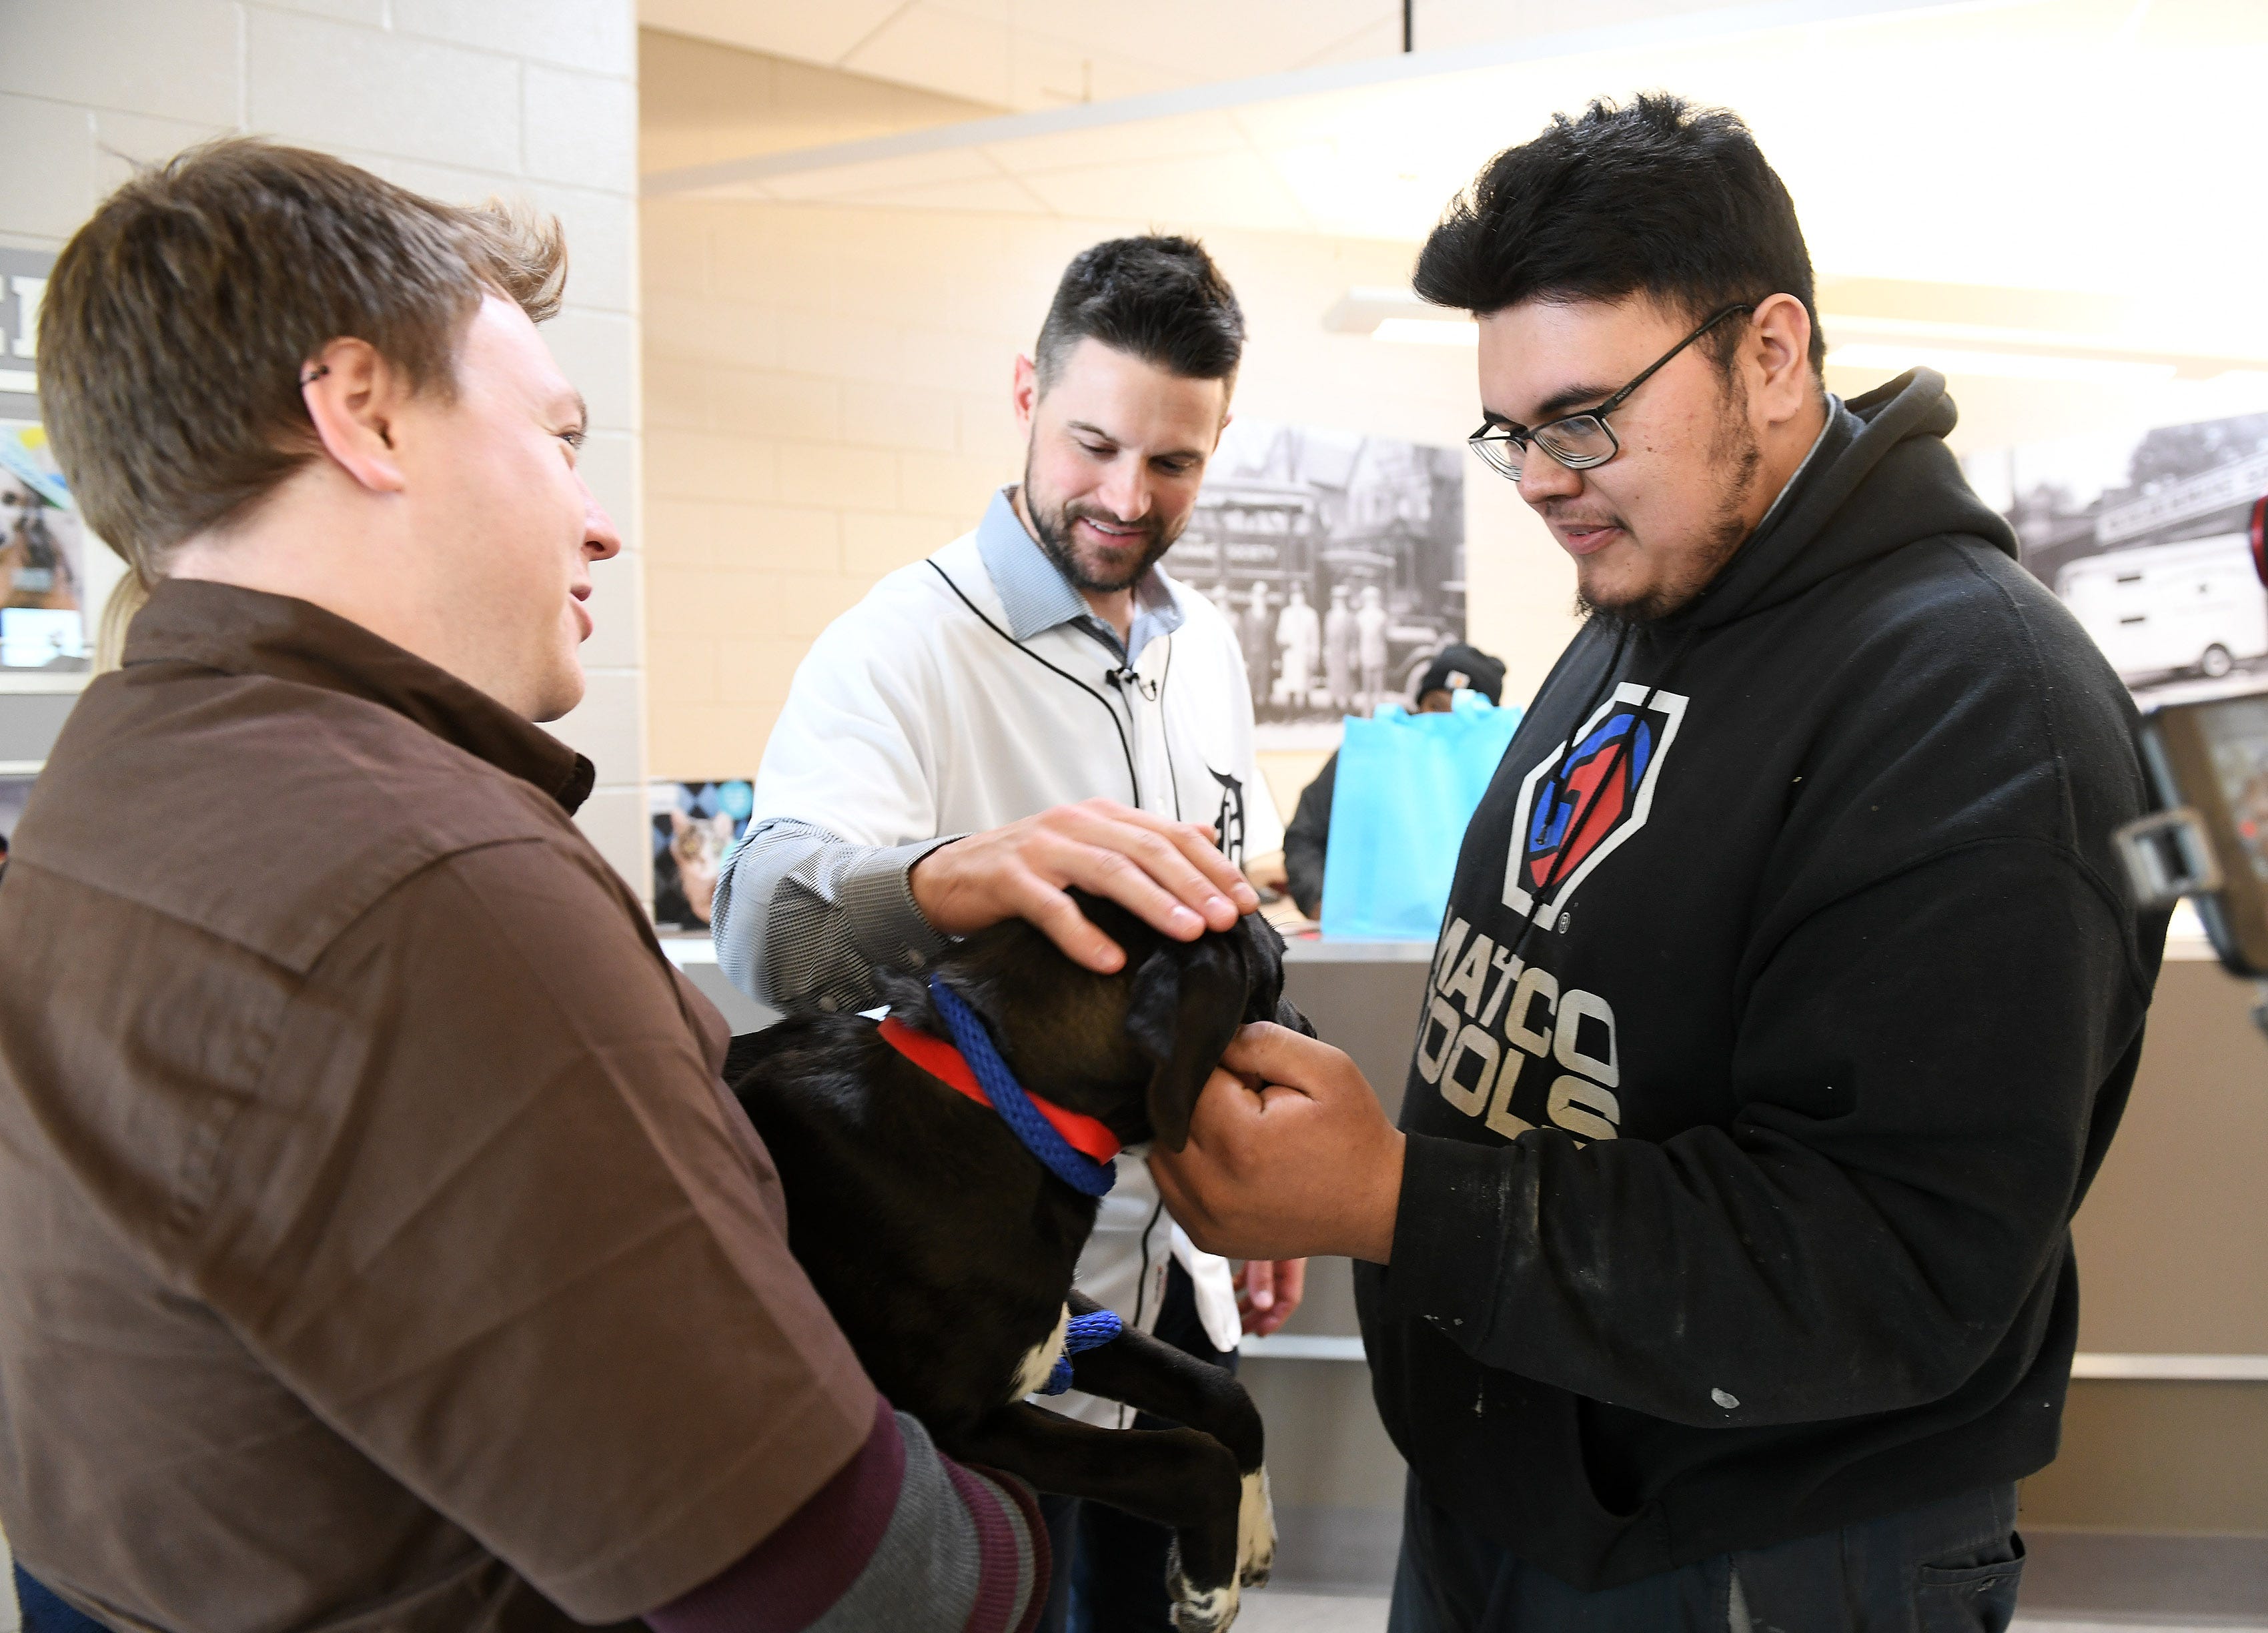 While Michigan Humane Society animal transport driver Jeremy Colborn holds her, Tigers shortstop Jordy Mercer and Marcelo Alvarado, 24, of Detroit, right, pet Lark, a Labrador that Marcelo is adopting, during a stop on the 2019 Detroit Tigers Winter Caravan at the Michigan Humane Society in Detroit on Jan. 25, 2019.